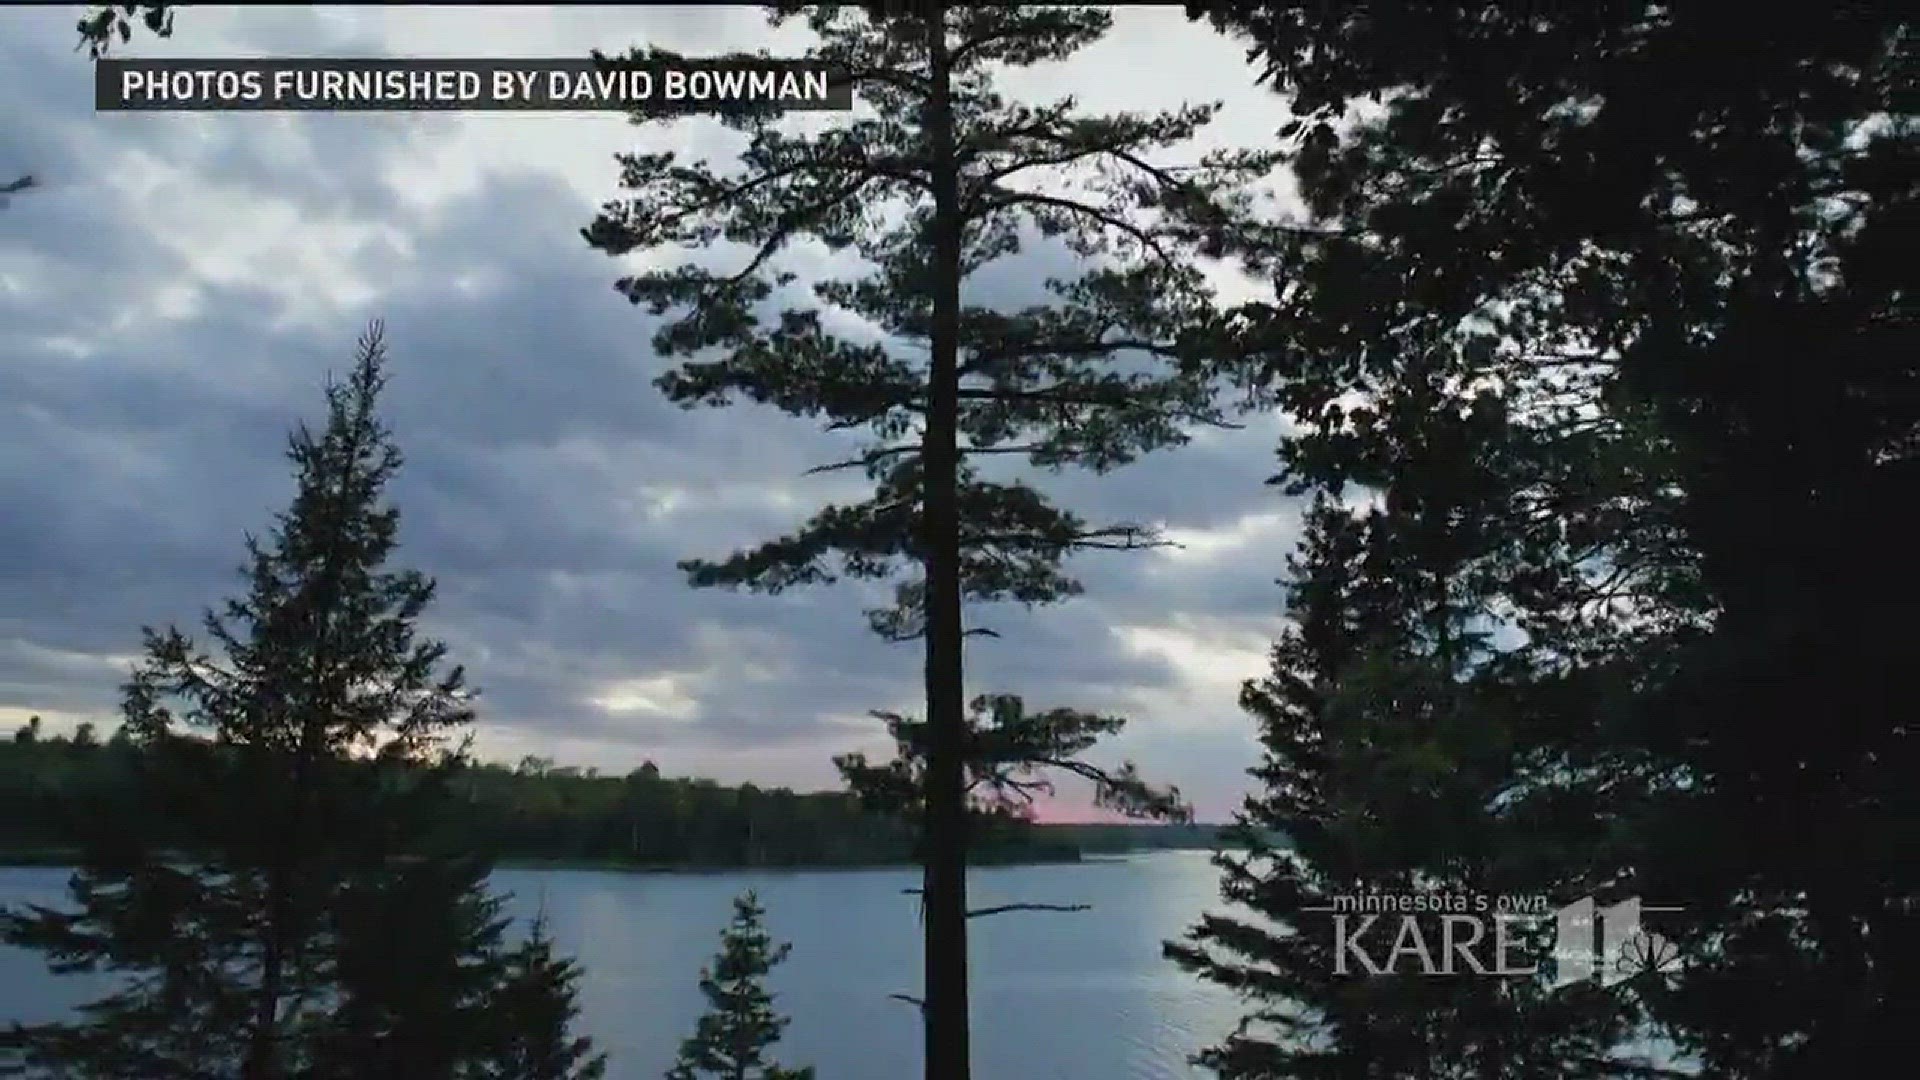 Ask KARE: What was the first State Park in Minnesota?